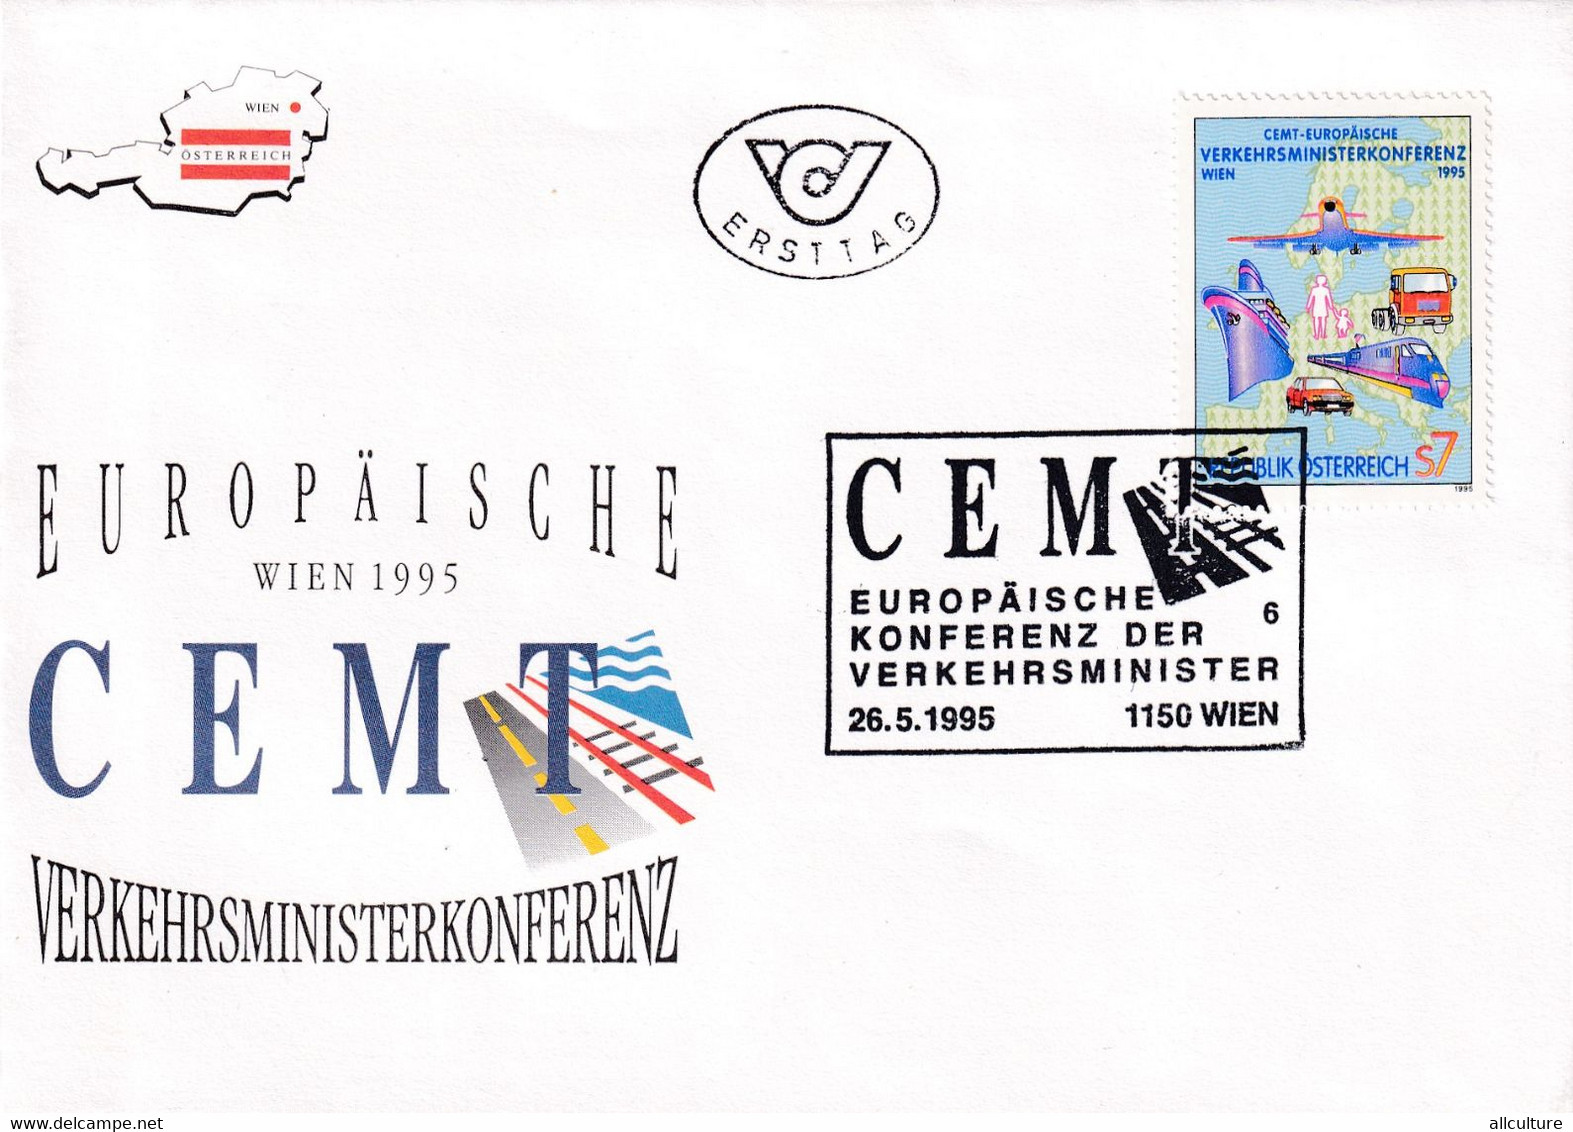 A8203- EUROPEAN CONFERENCE OF THE MINISTERS FOR TRANSPORT 1995  REPUBLIC OESTERREICH USED STAMP ON COVER AUSTRIA - Lettres & Documents